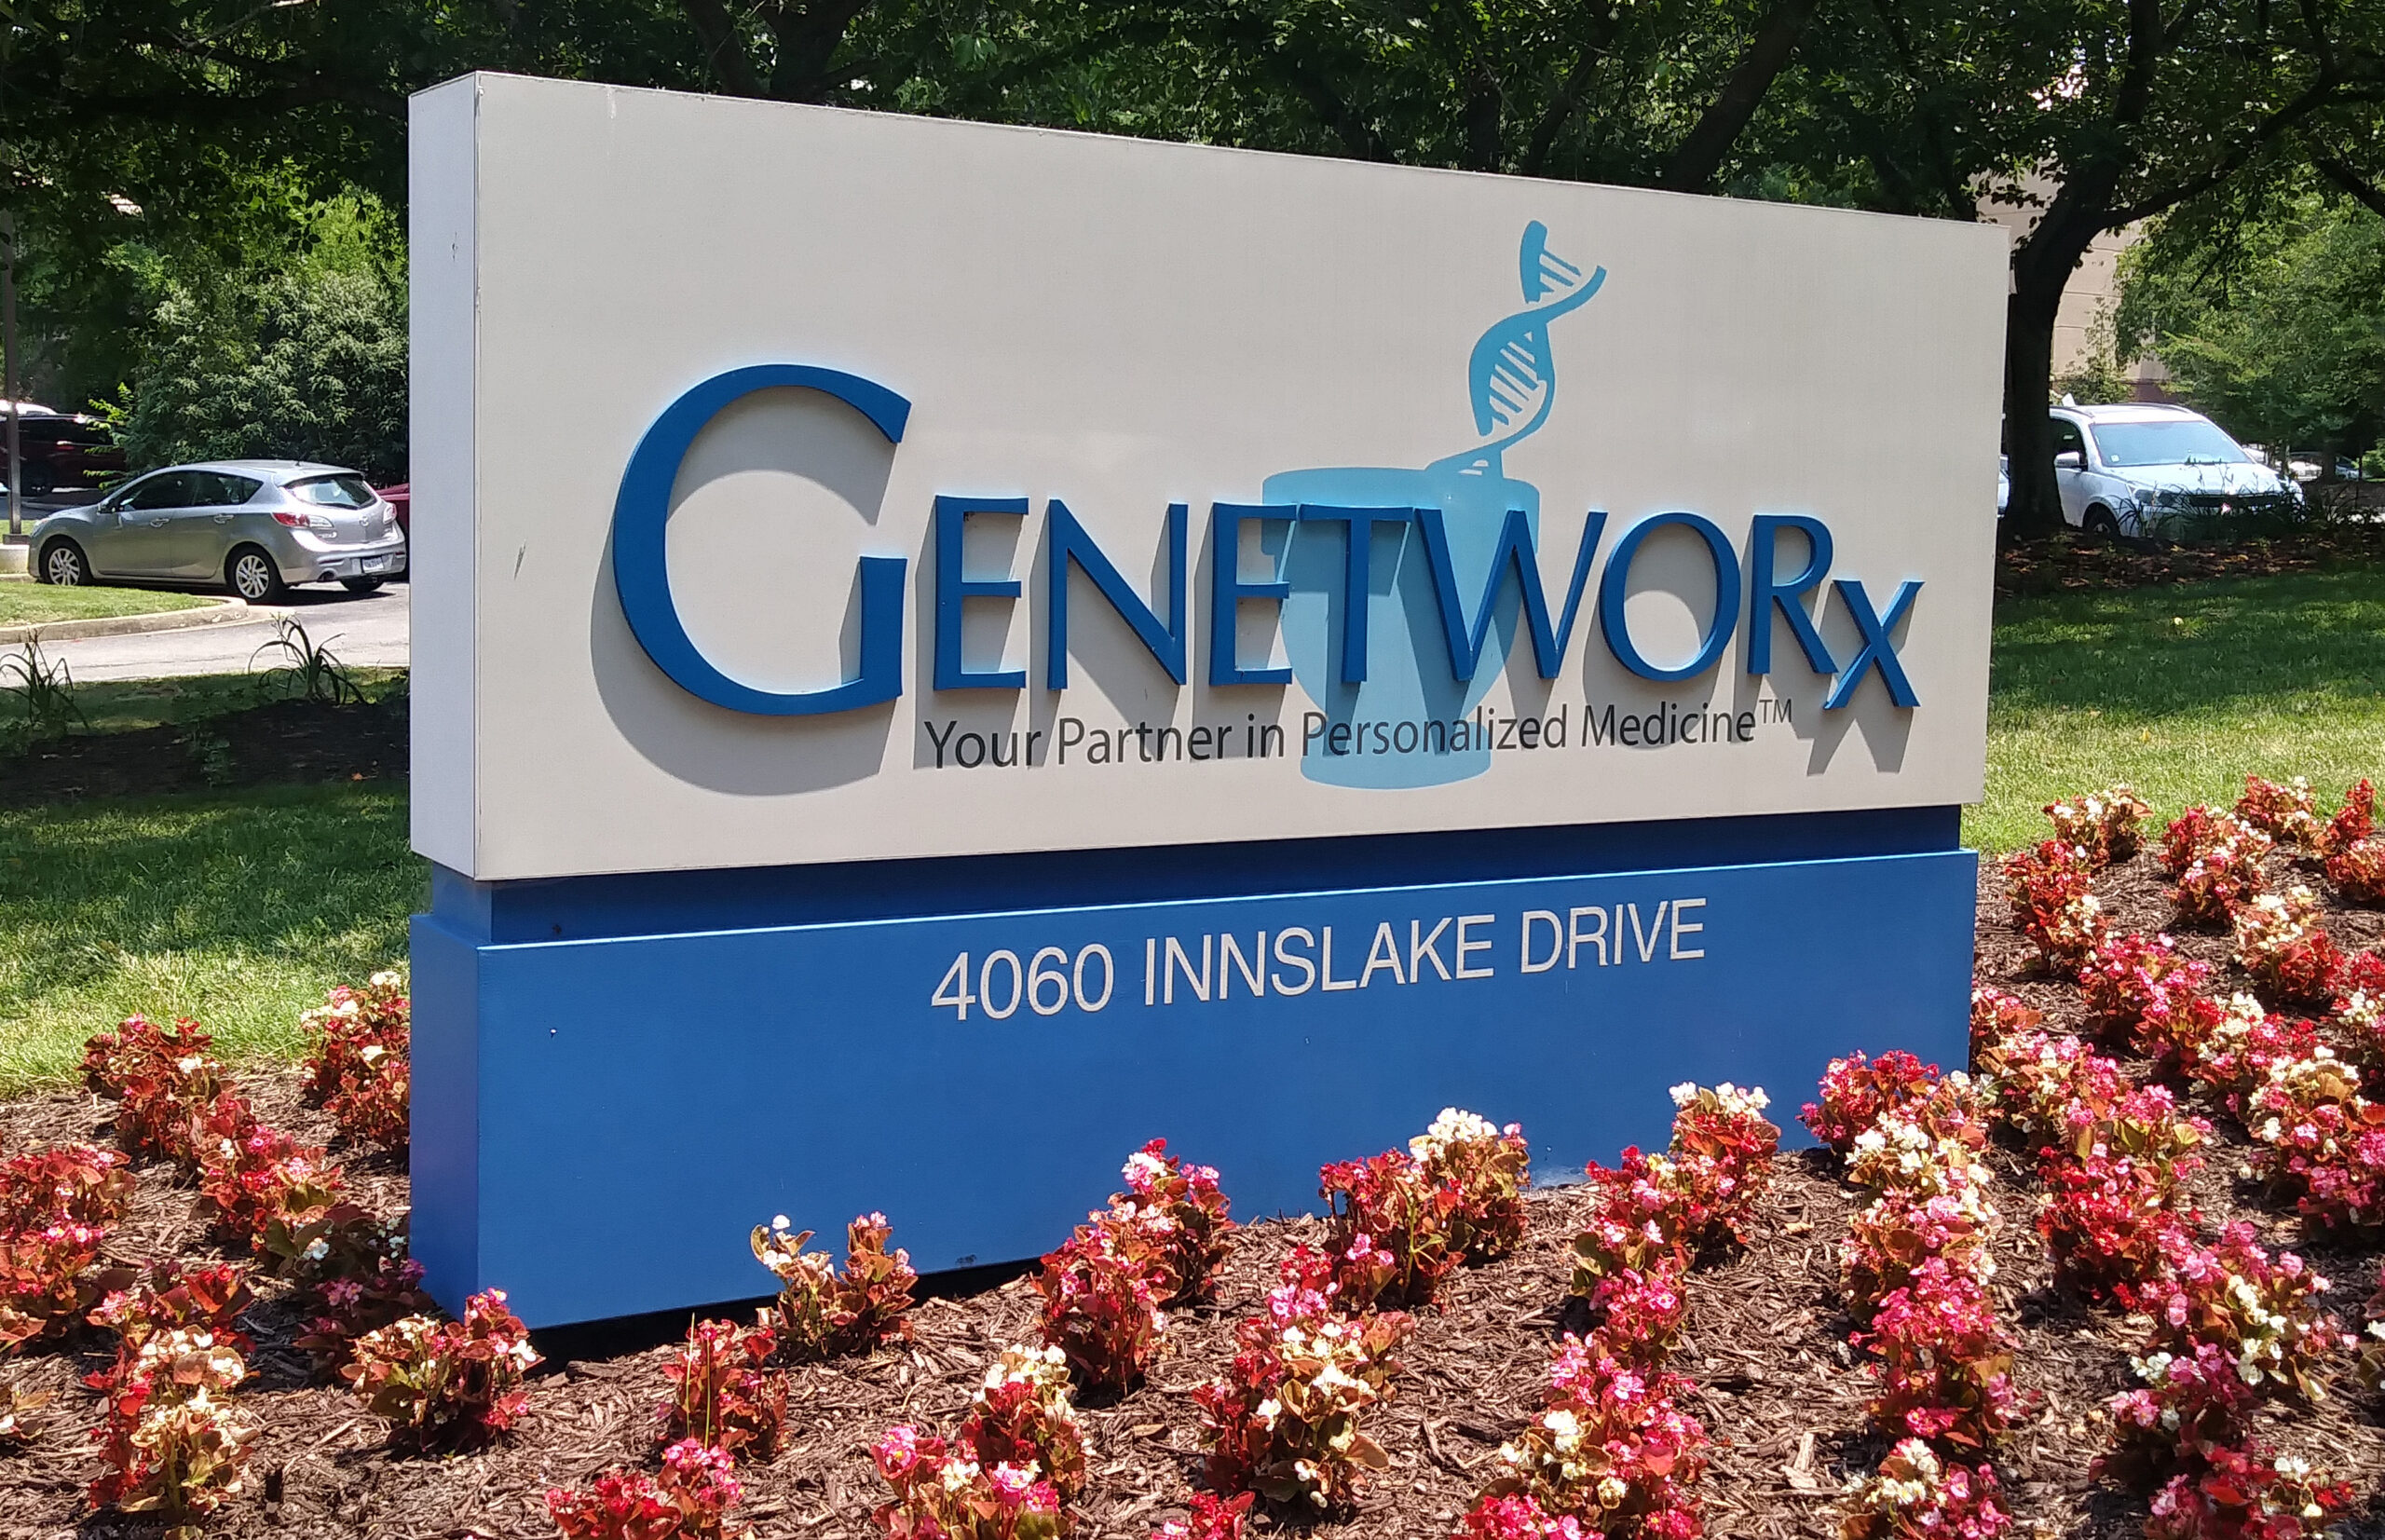 Genetworx doubling office space in Richmond area